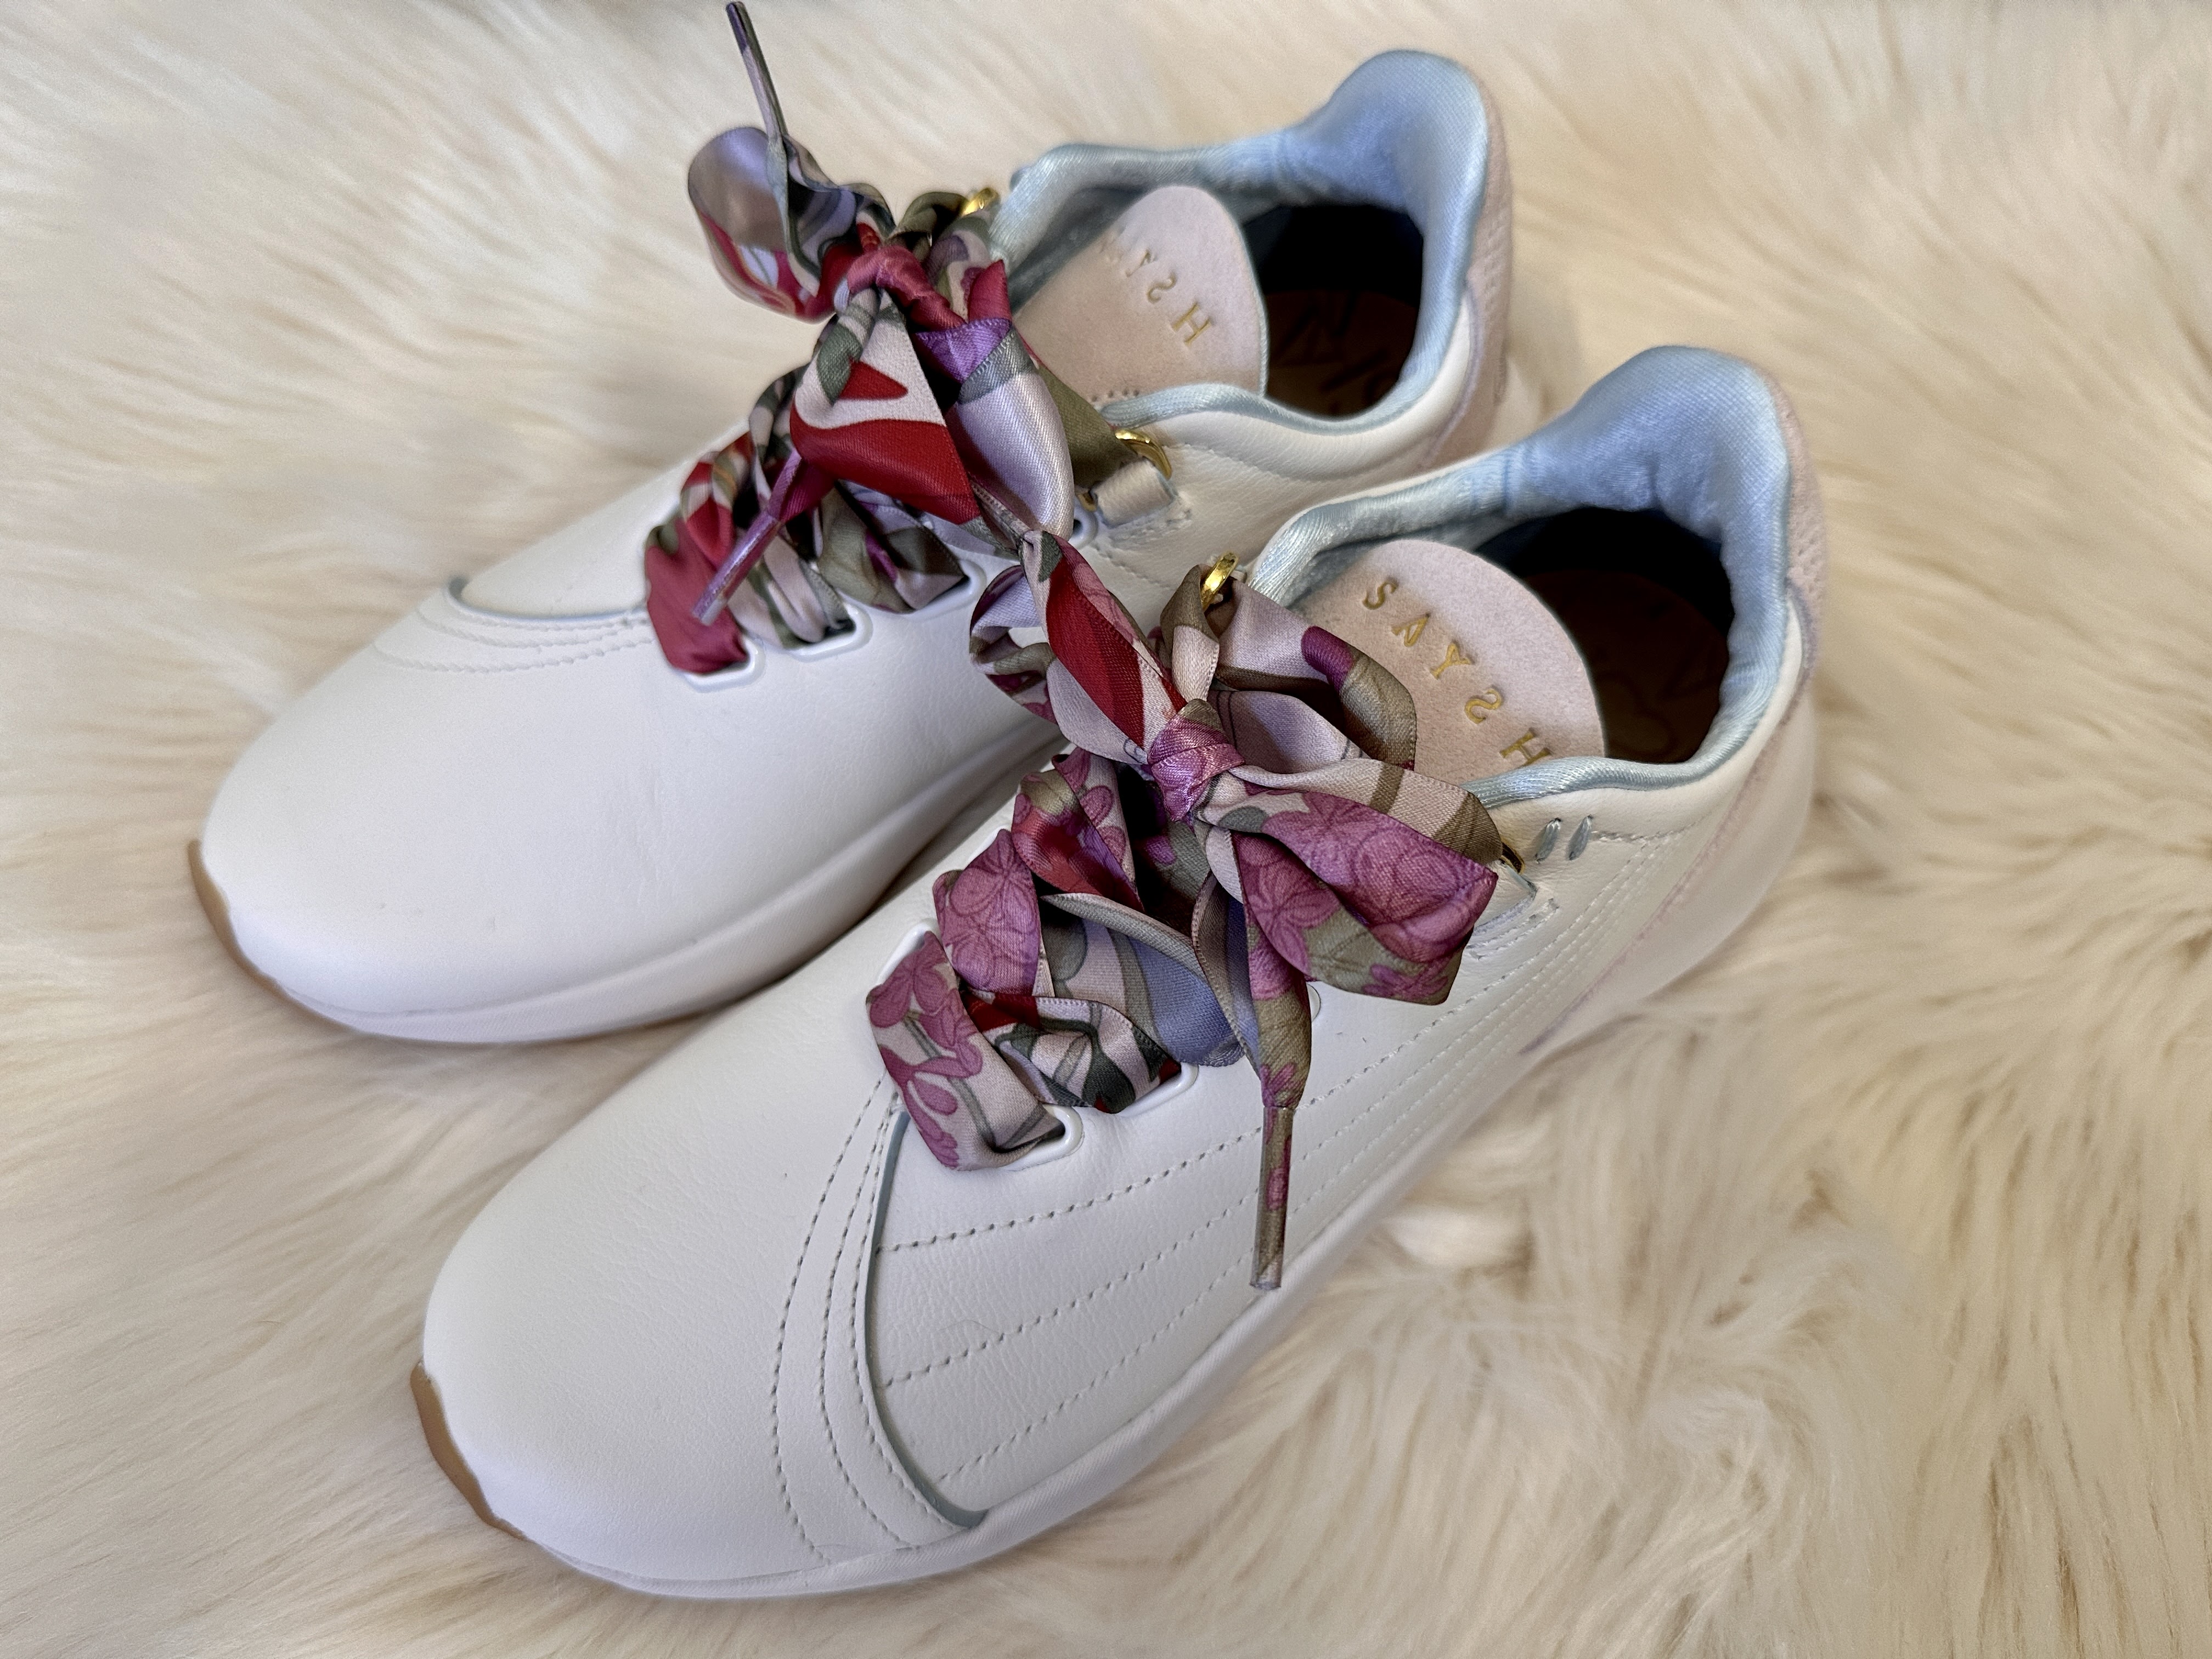 Louis Vuitton Charlie Sneaker Cacao. Size 07.5